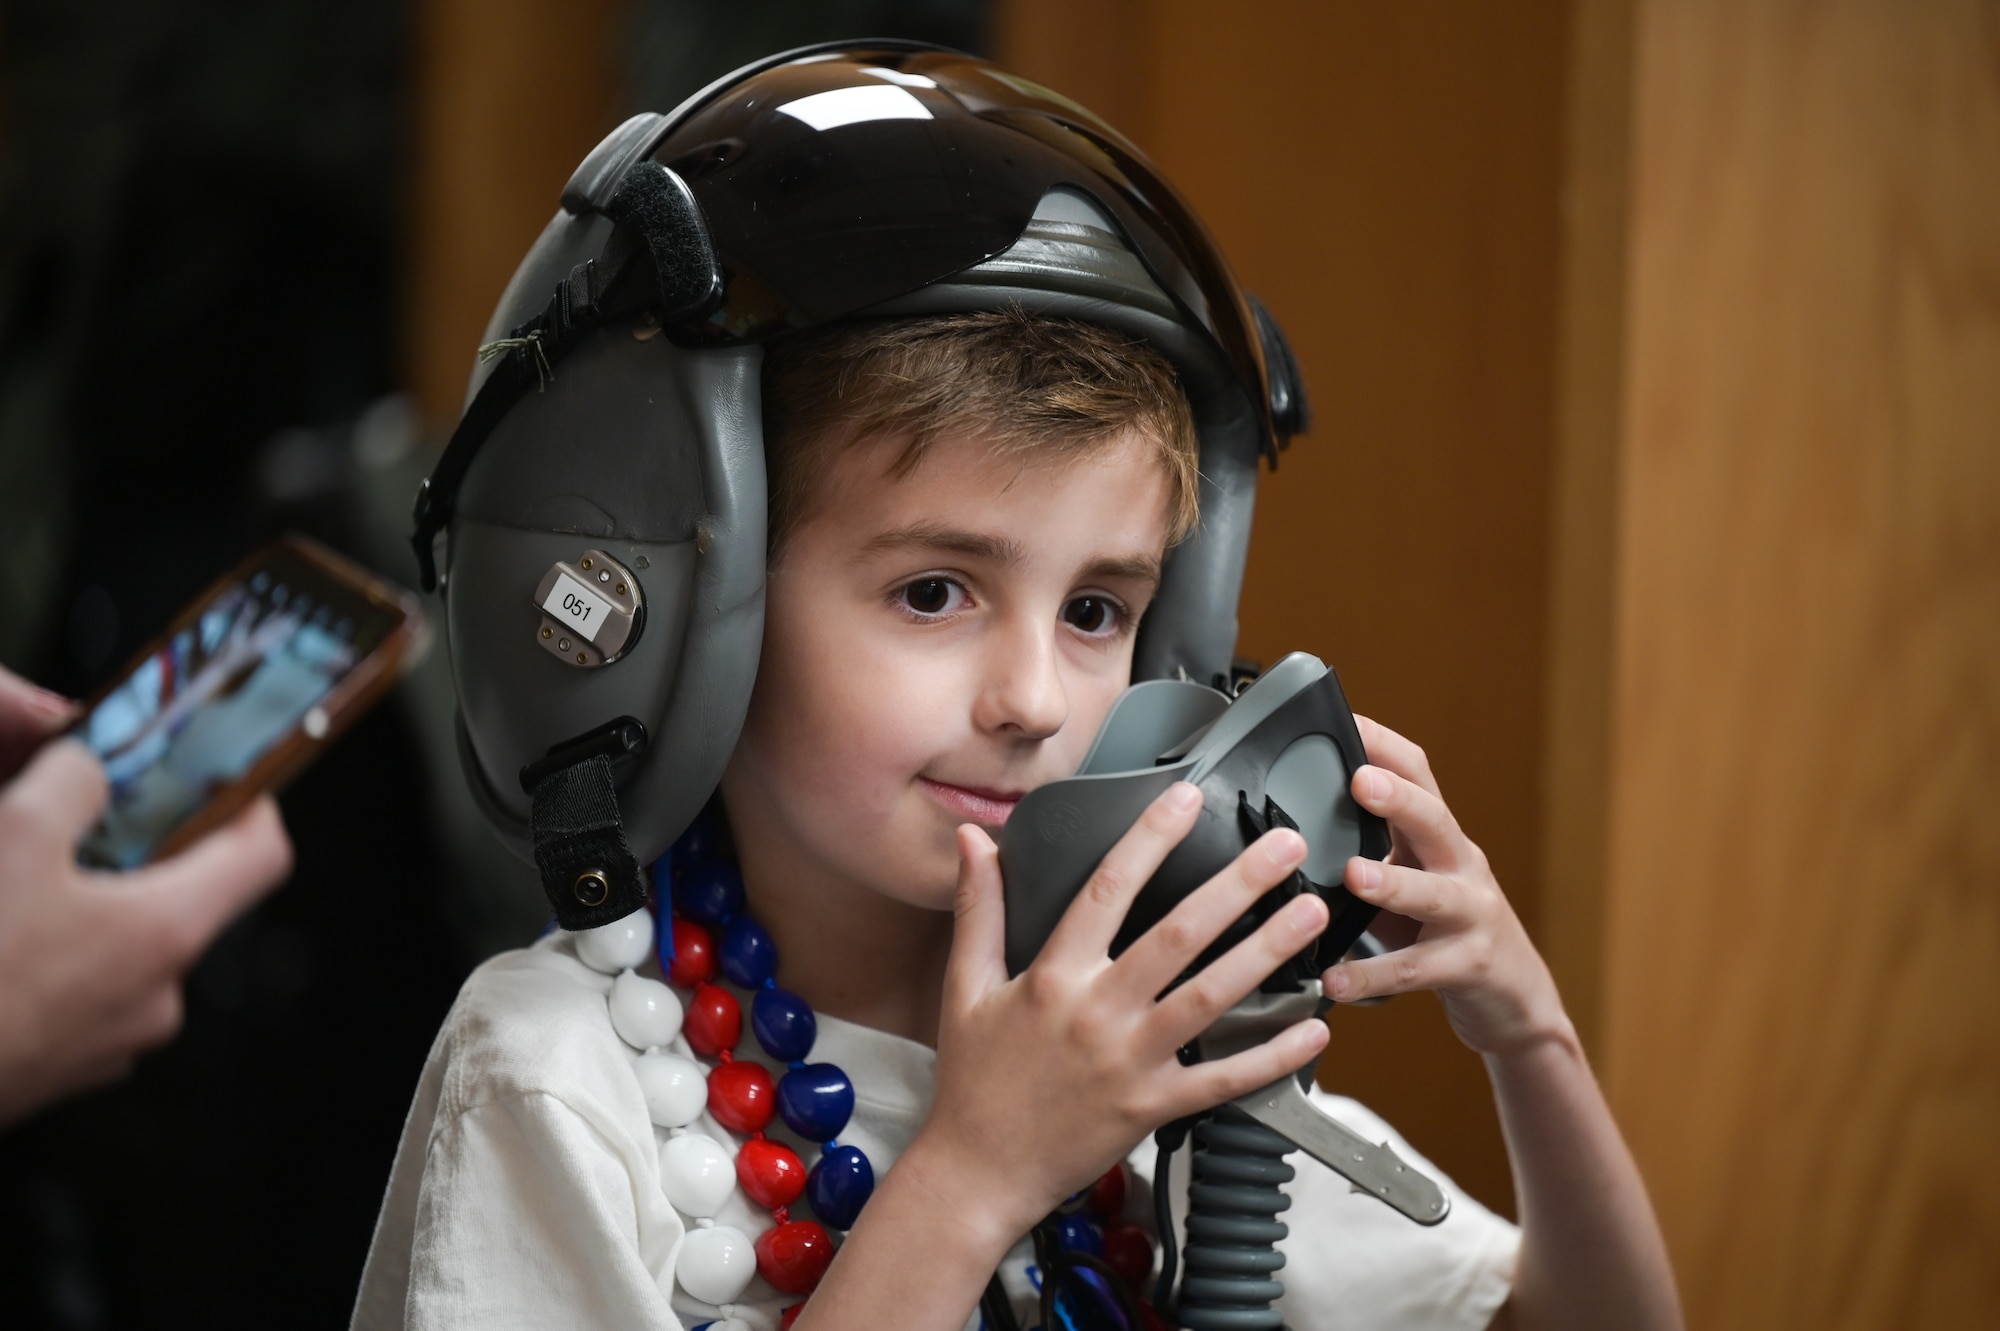 Elliott from the Make-A-Wish Foundation of Greater Los Angeles tests an F-22 Raptor pilot helmet during a tour of the 19th and 199th Fighter Squadrons at Joint Base Pearl Harbor-Hickam, Hawaii, May 5, 2023. Elliot learned the capabilities of the F-22 and the pilot’s equipment during his visit. (U.S. Air Force photo by Staff Sgt. Alan Ricker)